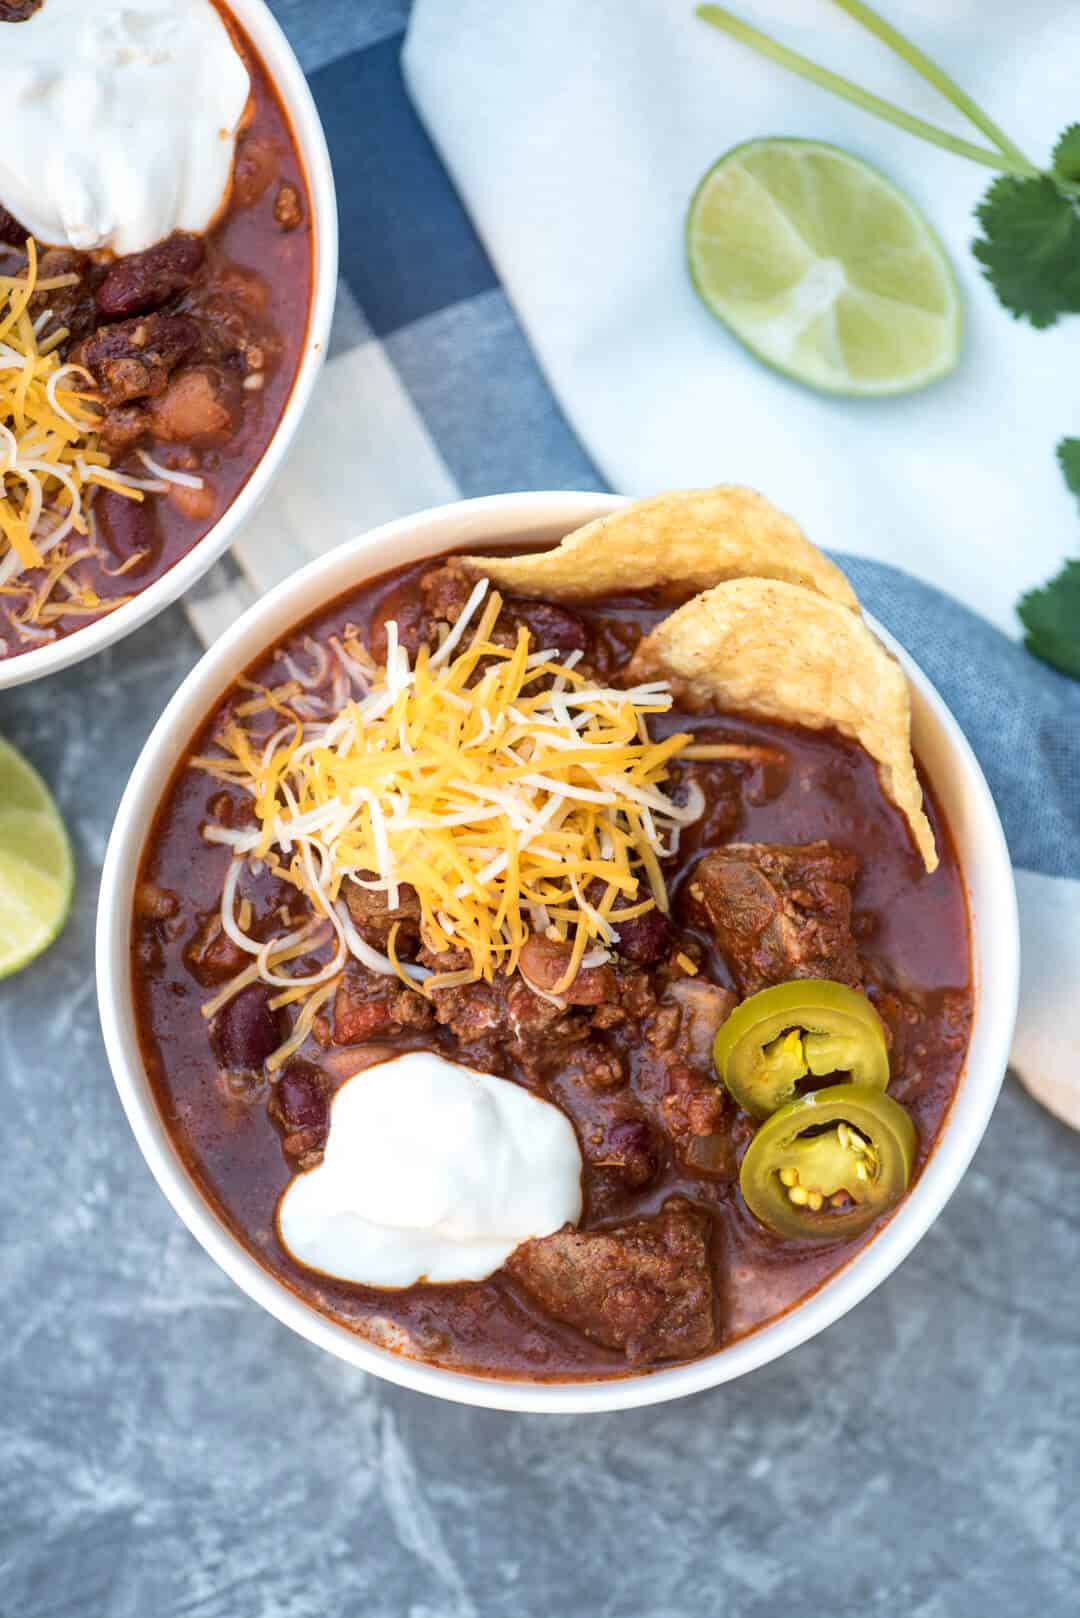 An over the top shot of a bowl of chili with toppings.